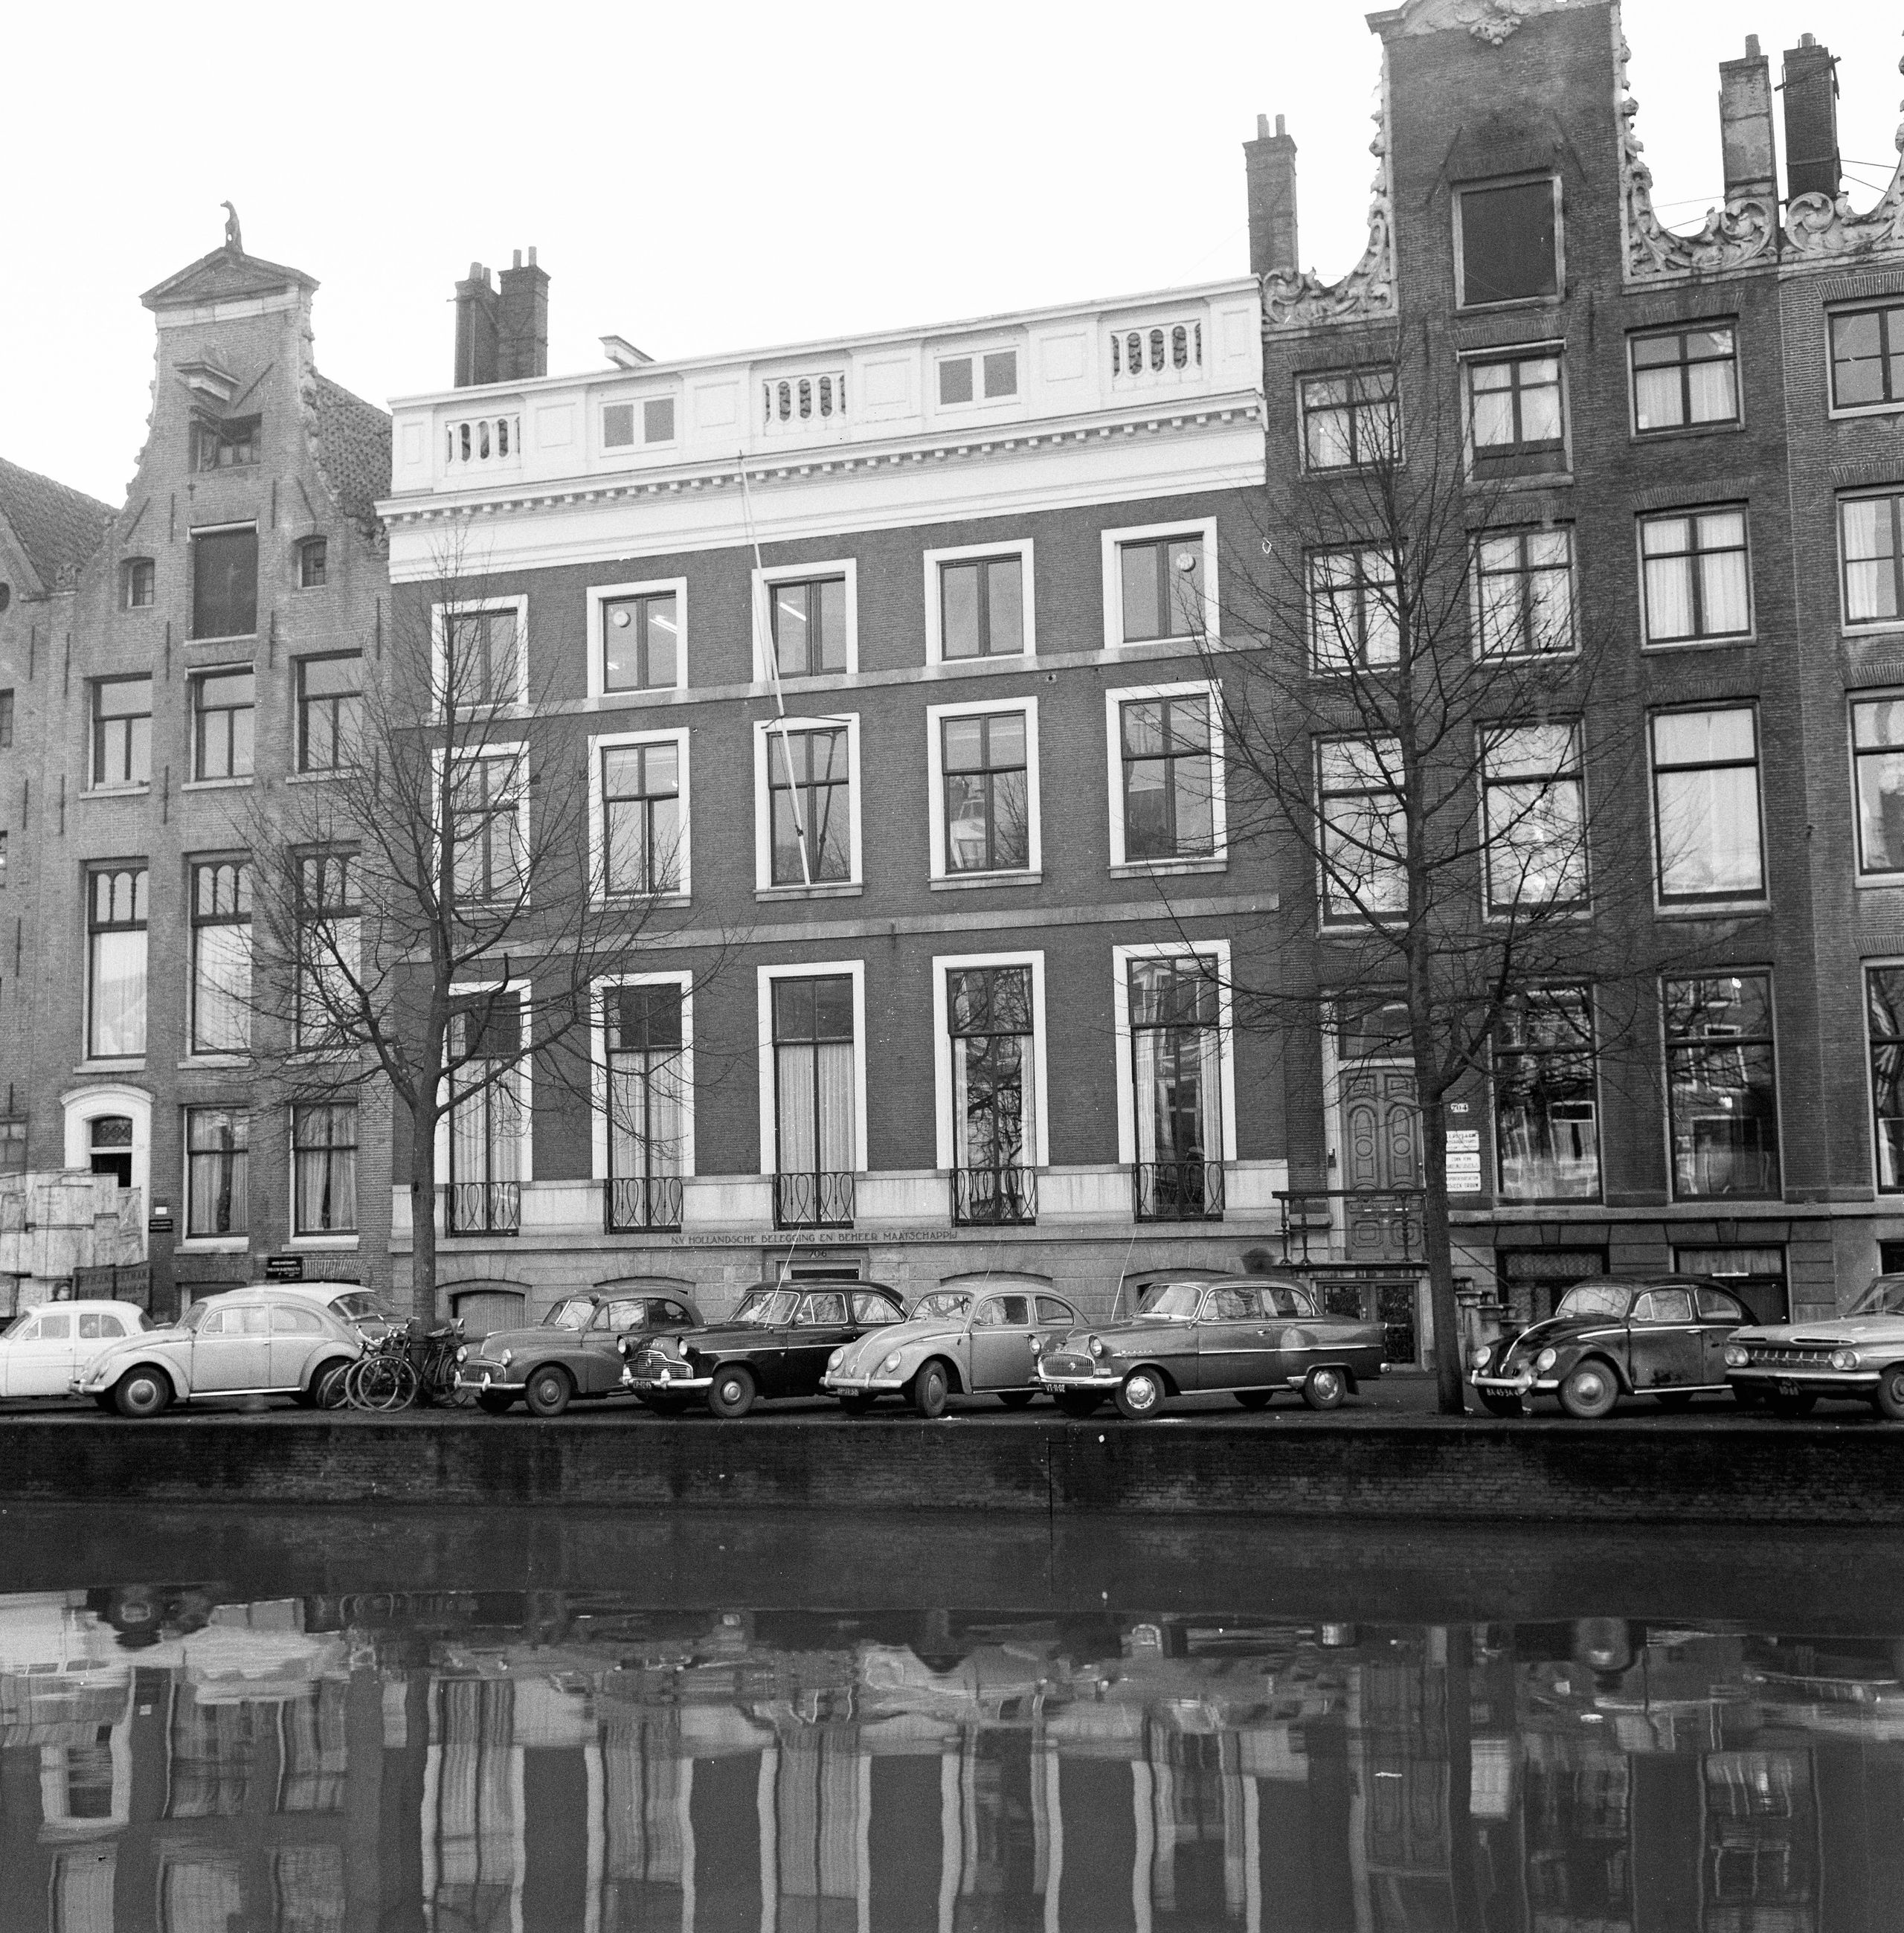 Keizersgracht 706 in Amsterdam, where NPM opens its first office in 1948.